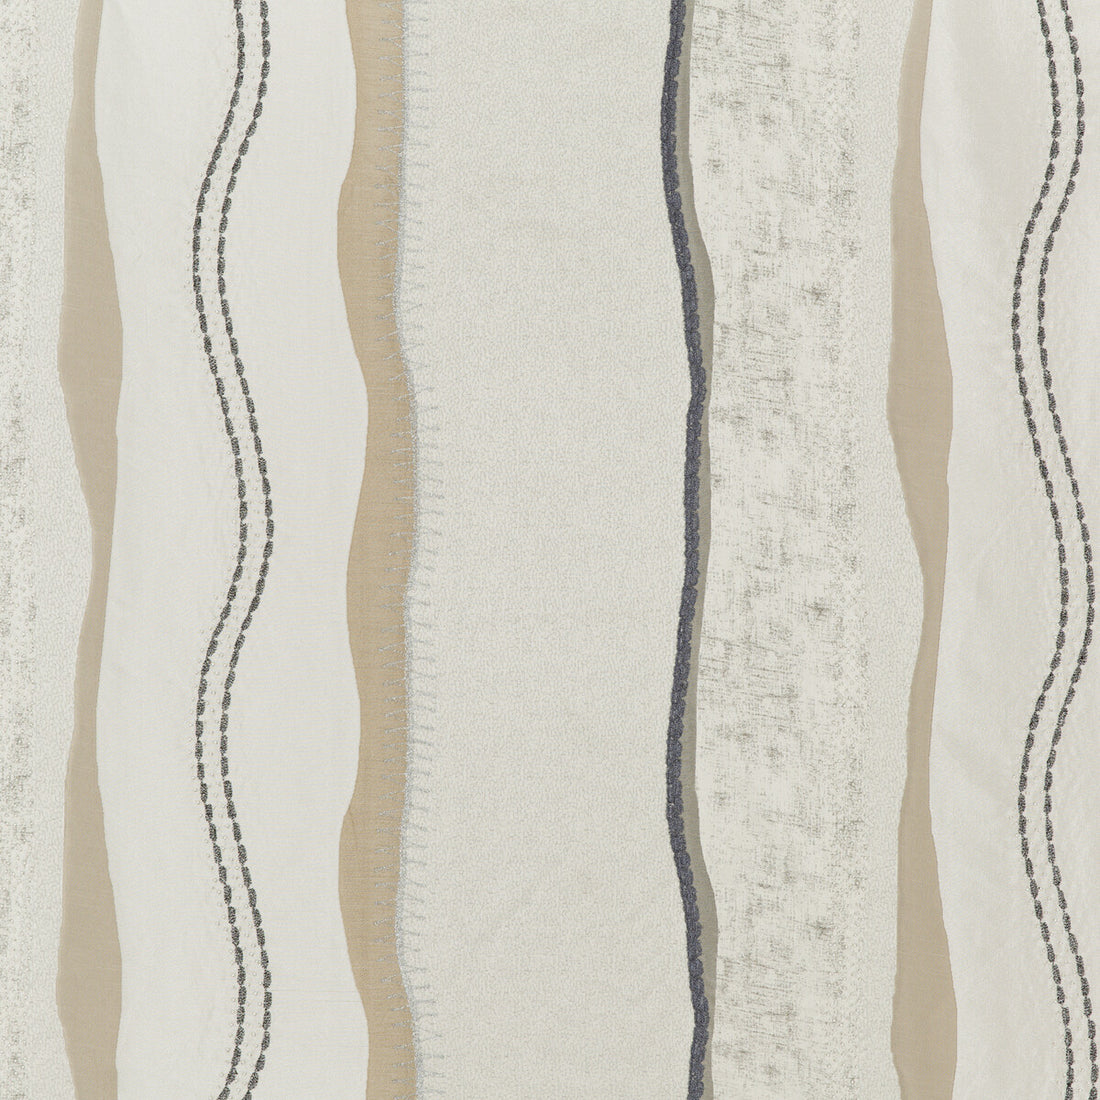 Solaris fabric in platinum/bronze color - pattern ED85269.1.0 - by Threads in the Odyssey collection